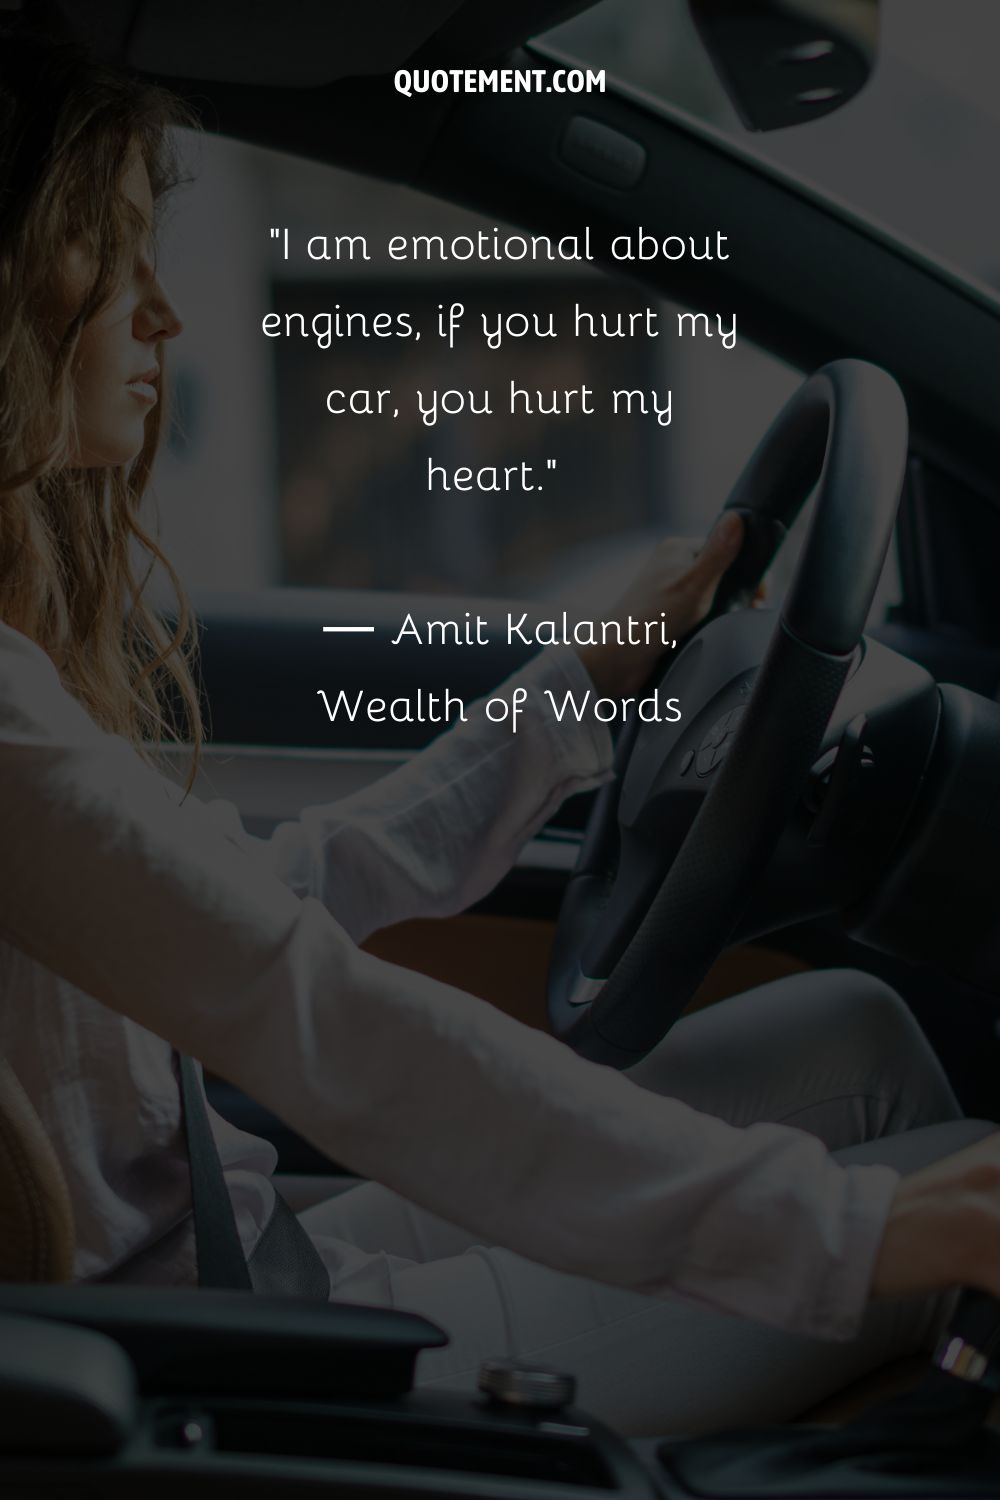 I am emotional about engines, if you hurt my car, you hurt my heart